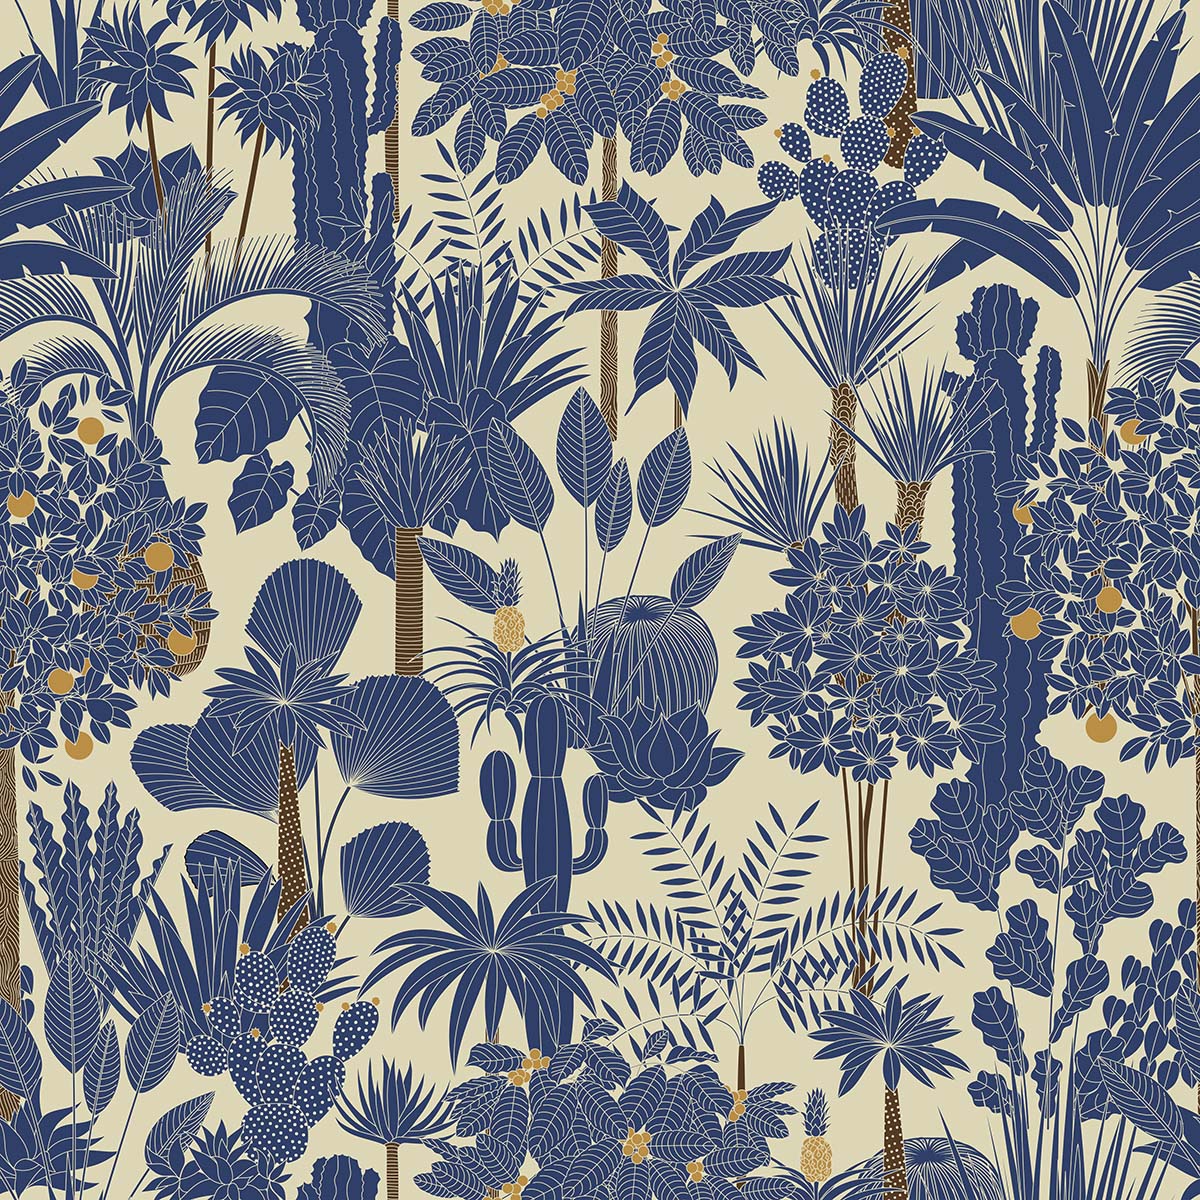 A pattern of blue and white plants